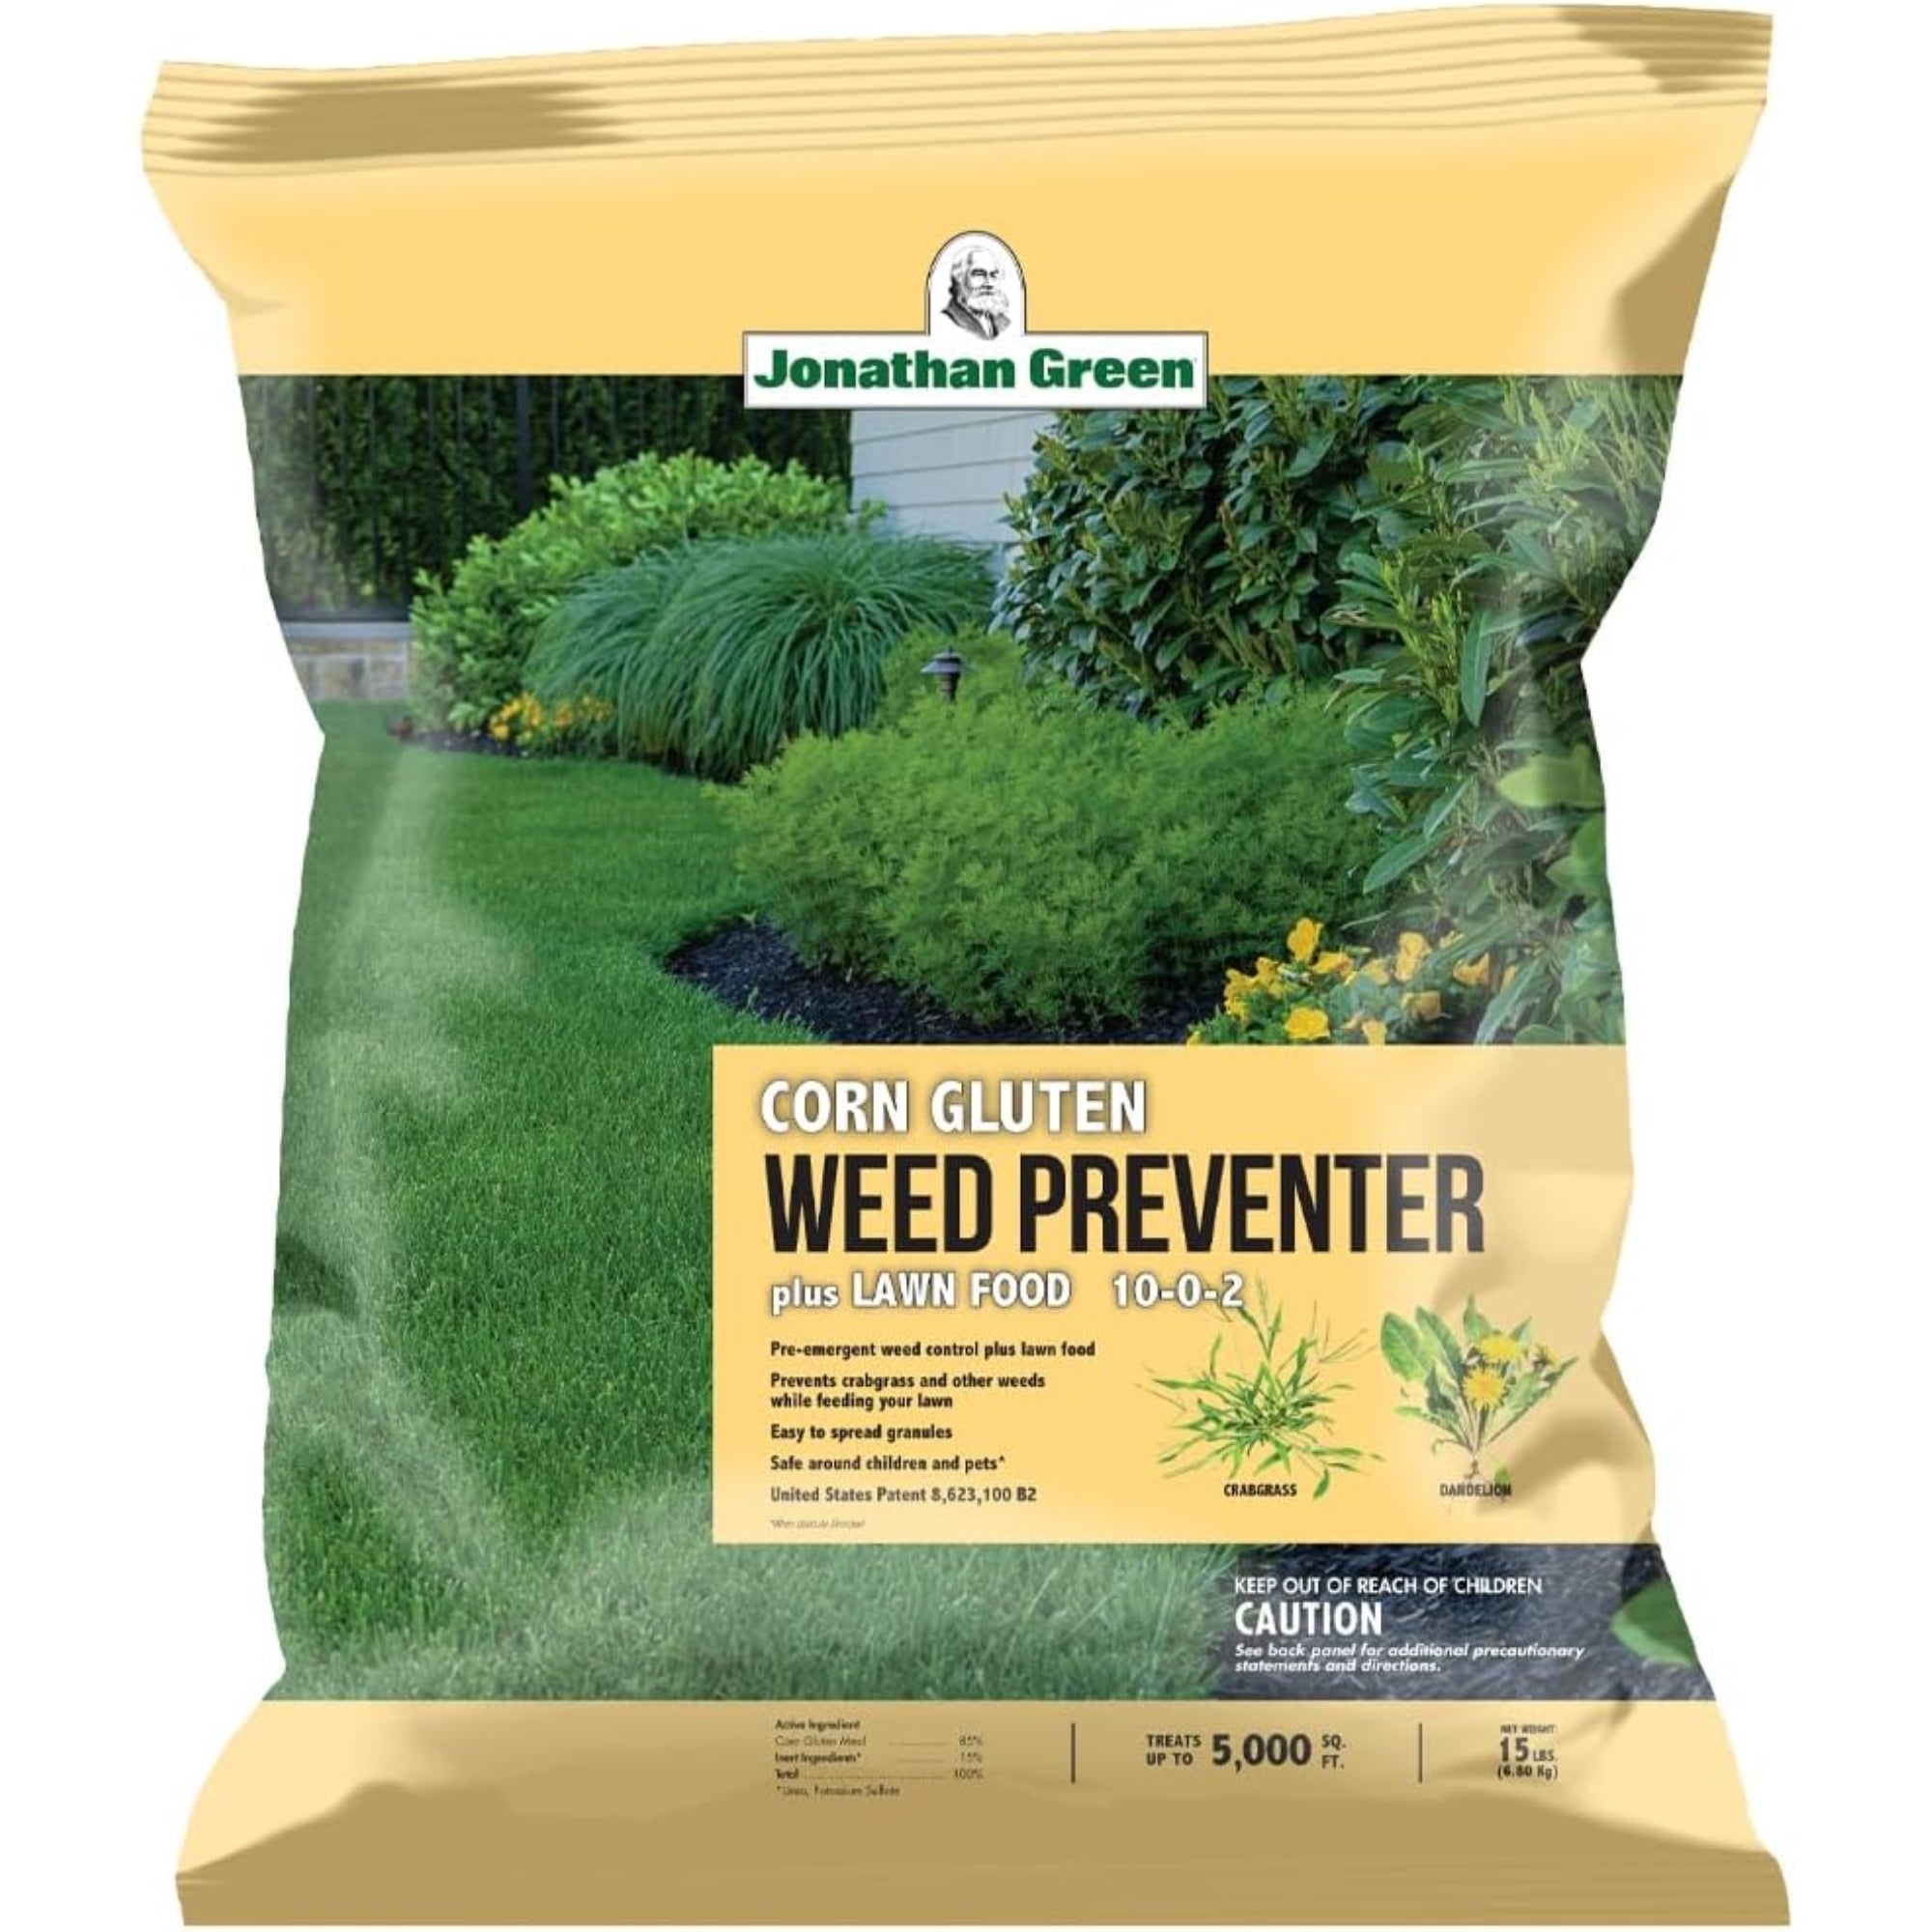 Jonathan Green Corn Gluten Weed Preventer Plus Lawn Food, 5M (5,000 sq ft Coverage)